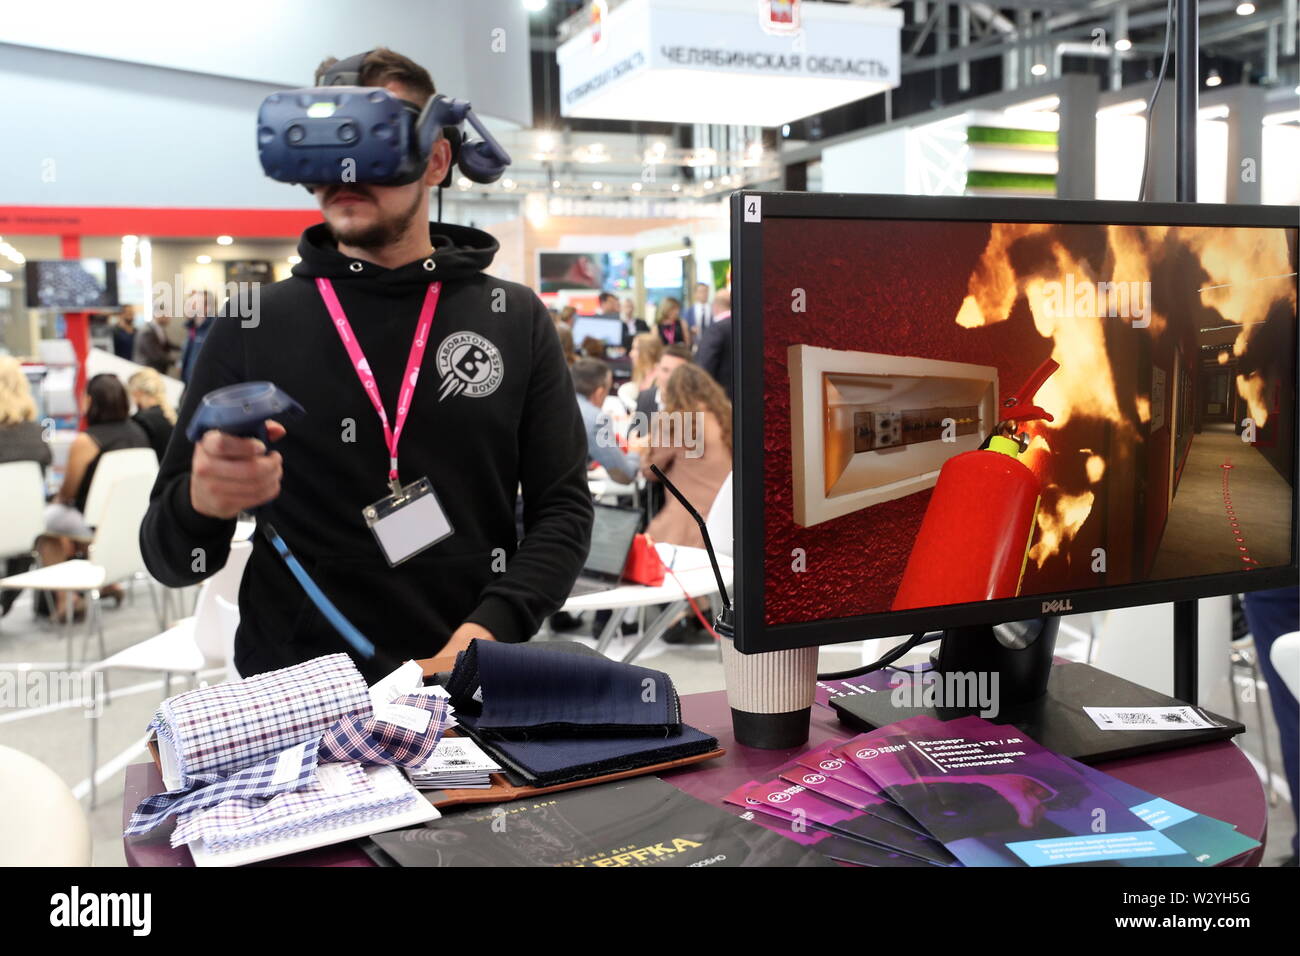 YEKATERINBURG, RUSSIA - JULY 11, 2019: A man in a VR headset uses a firefighting simulator at the 2019 Innoprom International Industrial Trade Fair, at the Yekaterinburg-Expo Exhibition Centre. Yegor Aleyev/TASS - Stock Image